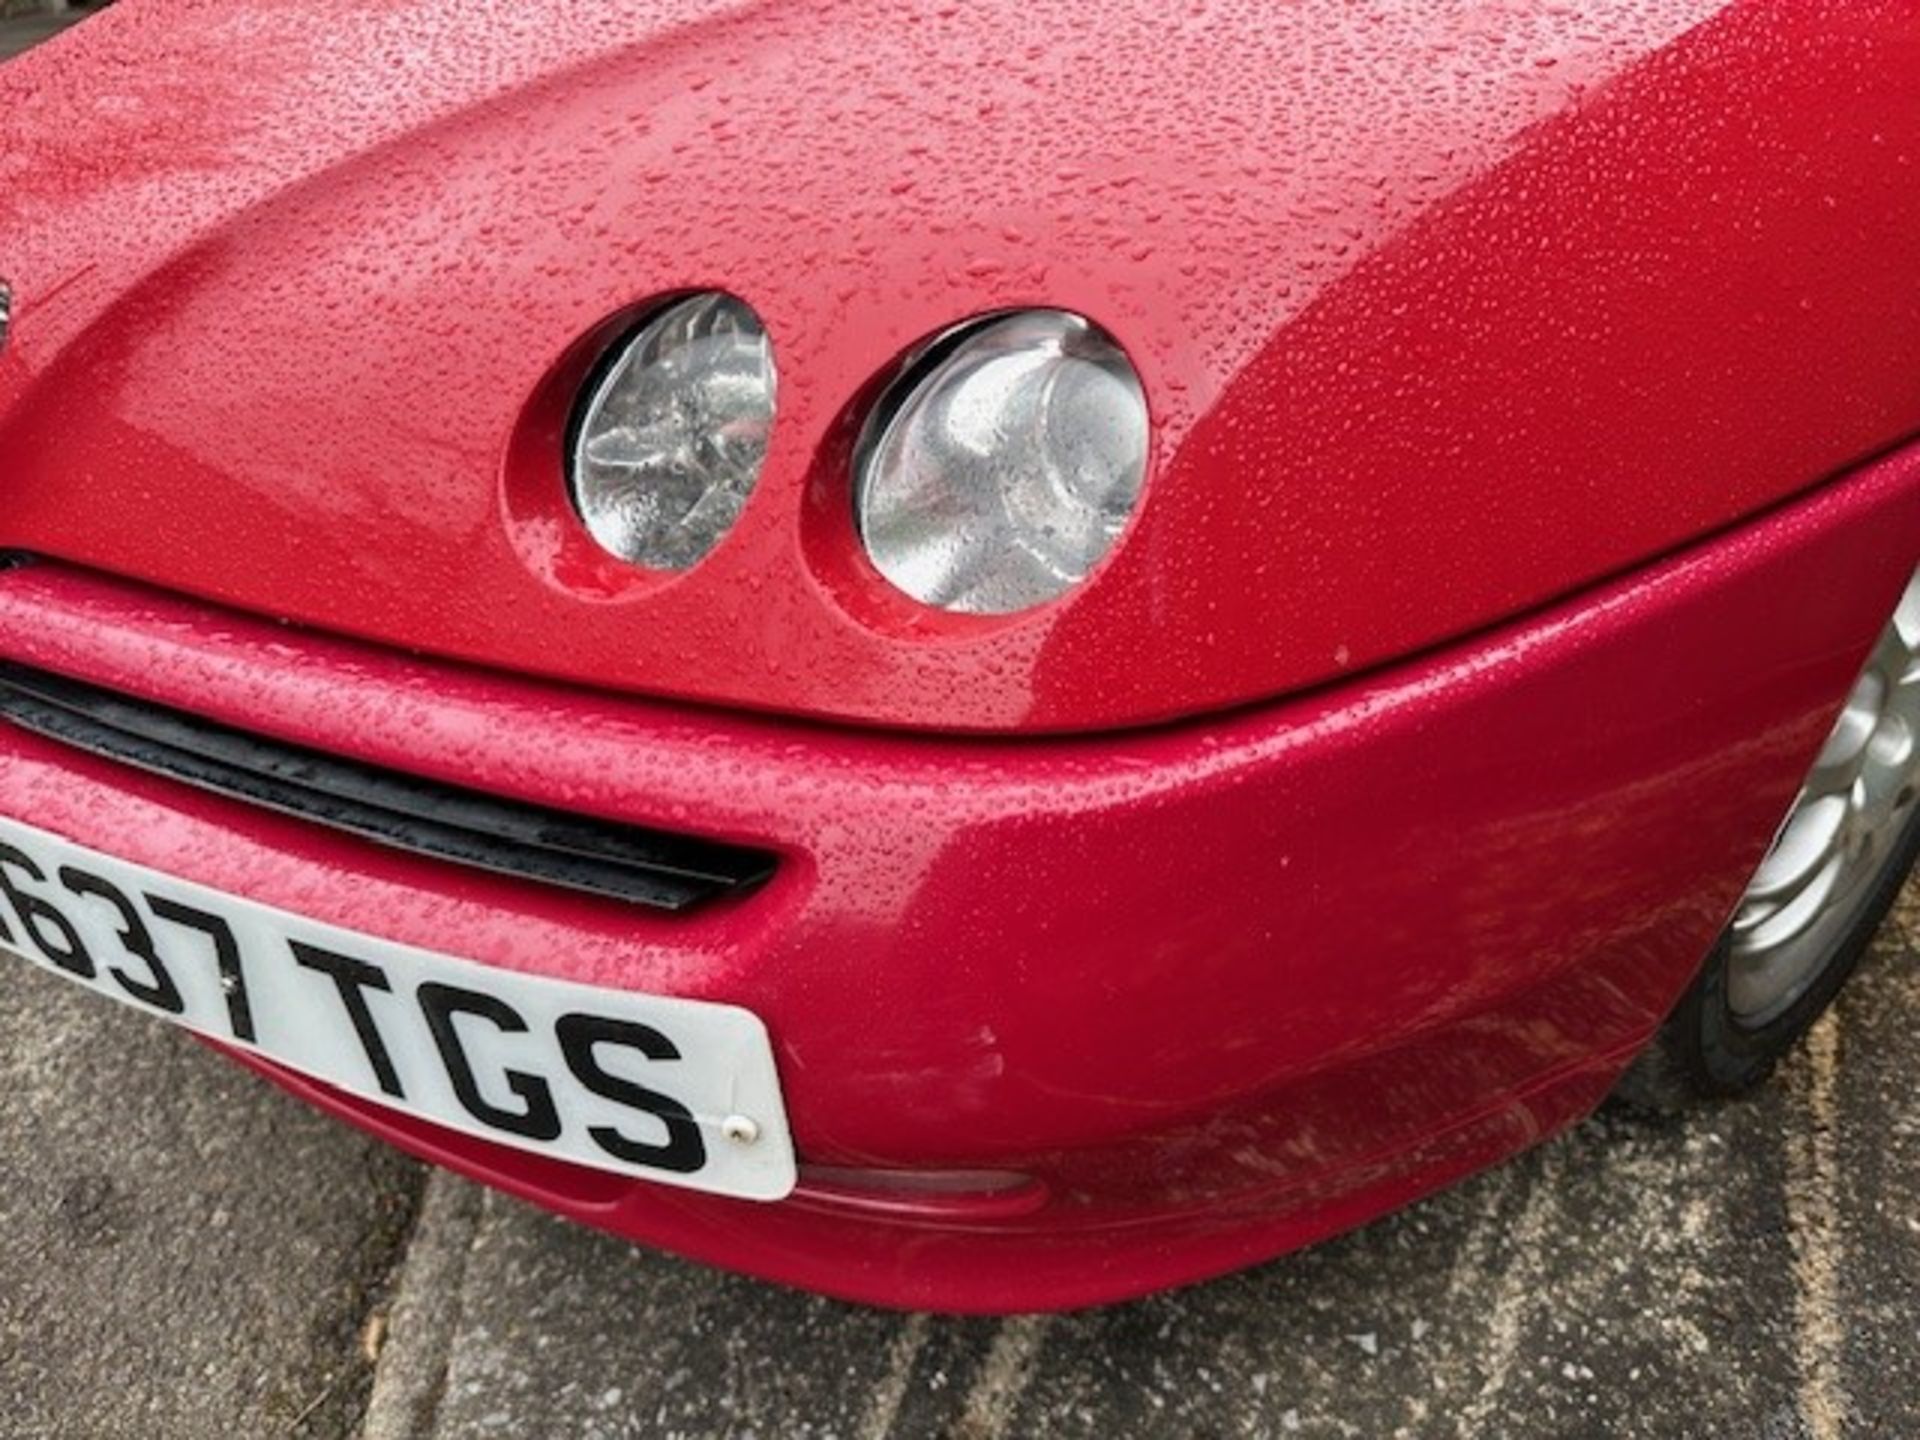 2000 Alfa Romeo Spider Lusso TS Spider Registration number W637 TGS Red with a black interior MOT - Image 5 of 14